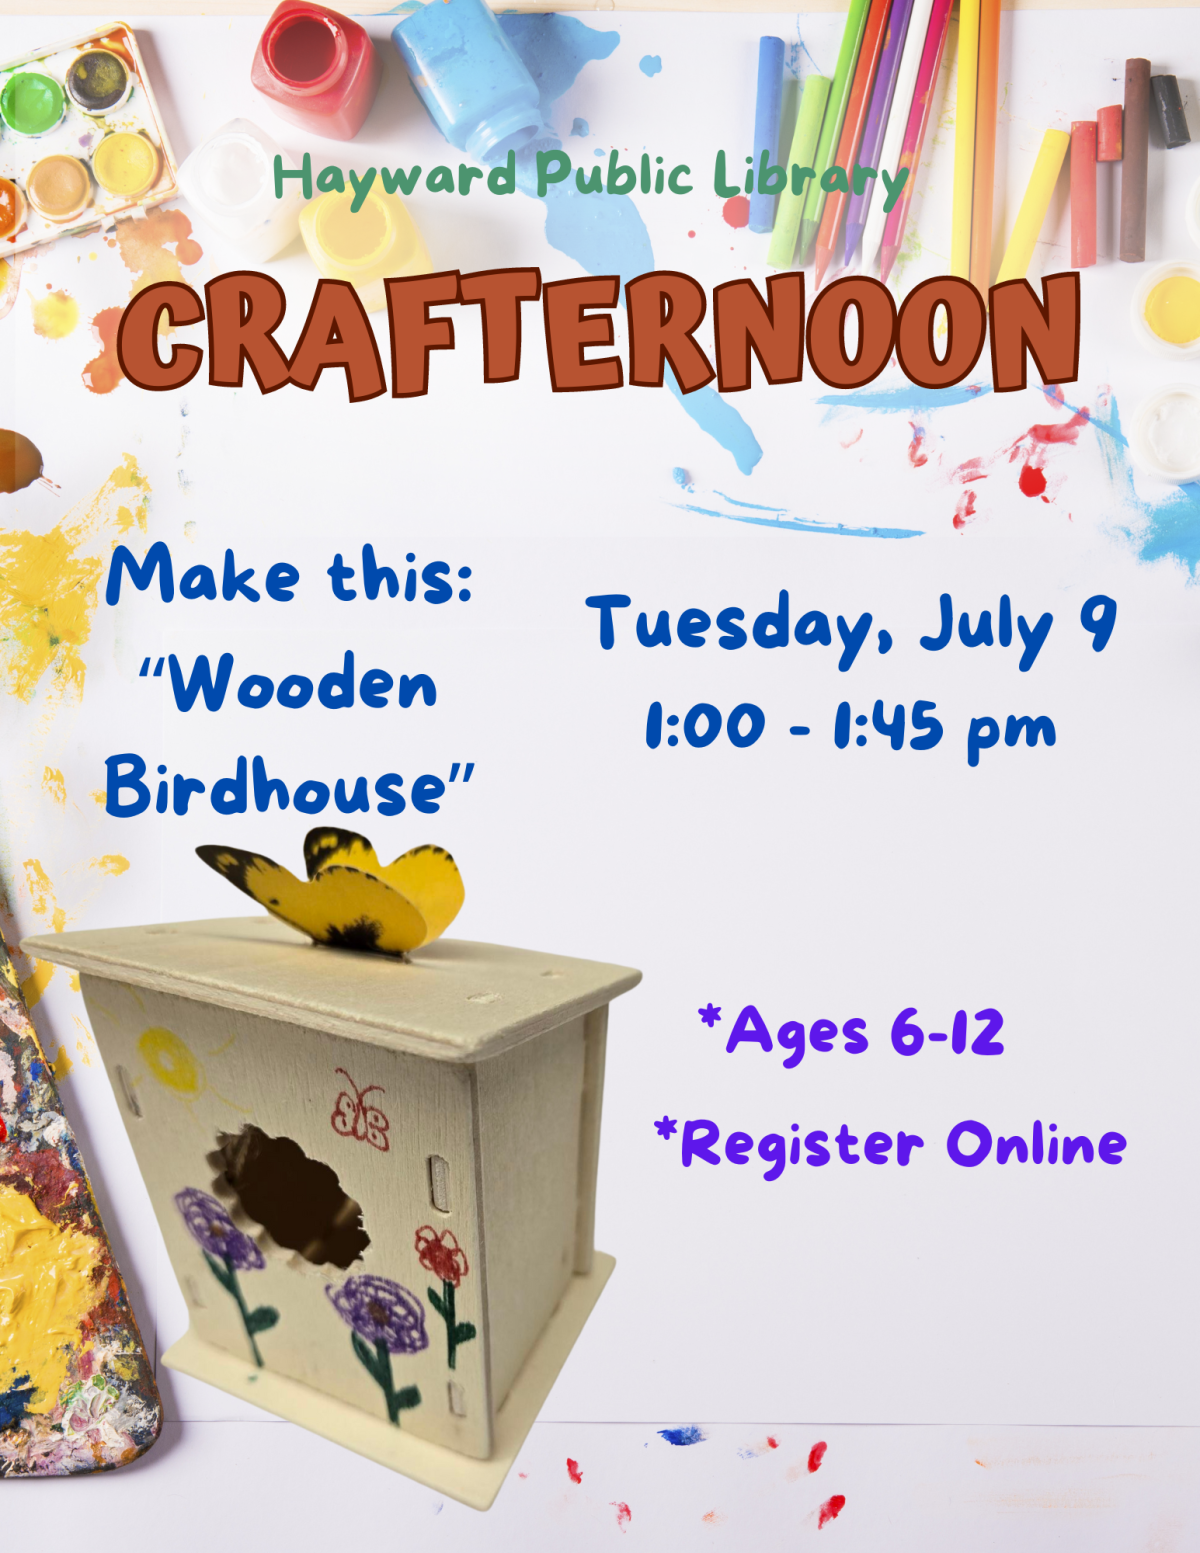 craft supplies in the background, text says hayward public library crafternoon, make a wooden birdhouse, tuesday, july 9, 1-1:40 pm, ages 6-12, register online 